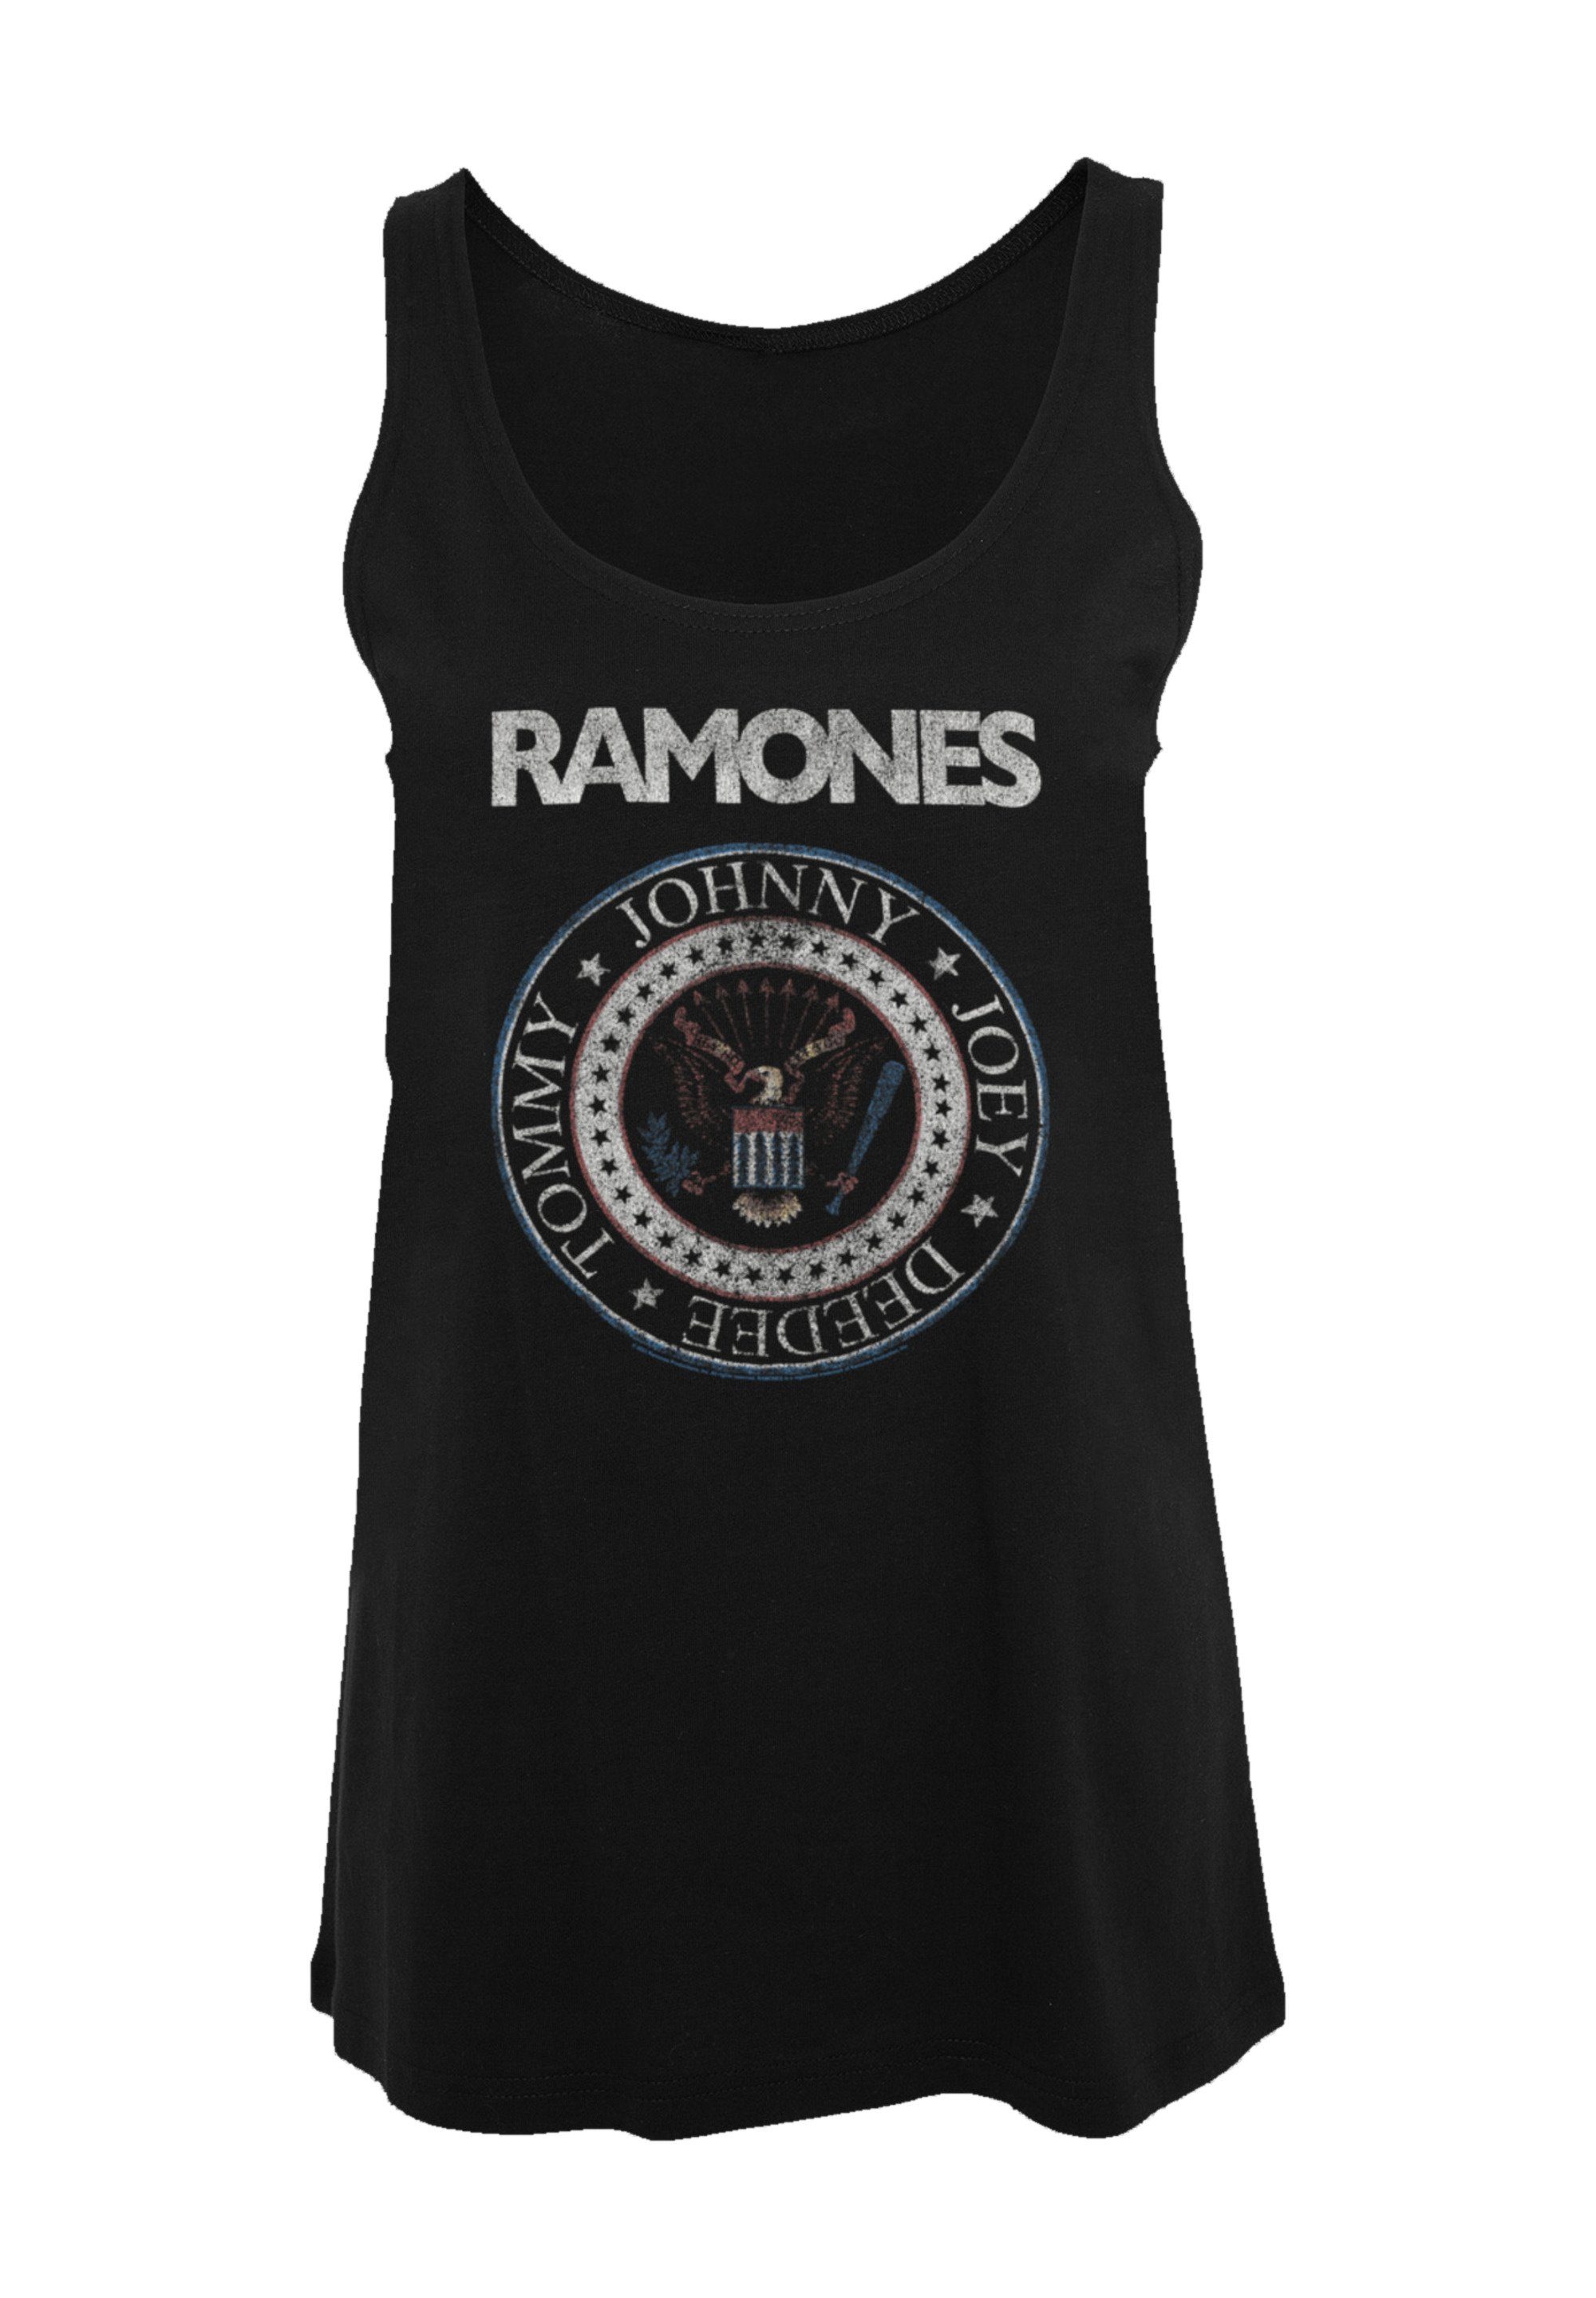 Band Ramones Qualität, F4NT4STIC T-Shirt Red Rock-Musik And White Band, Seal Rock Musik Premium